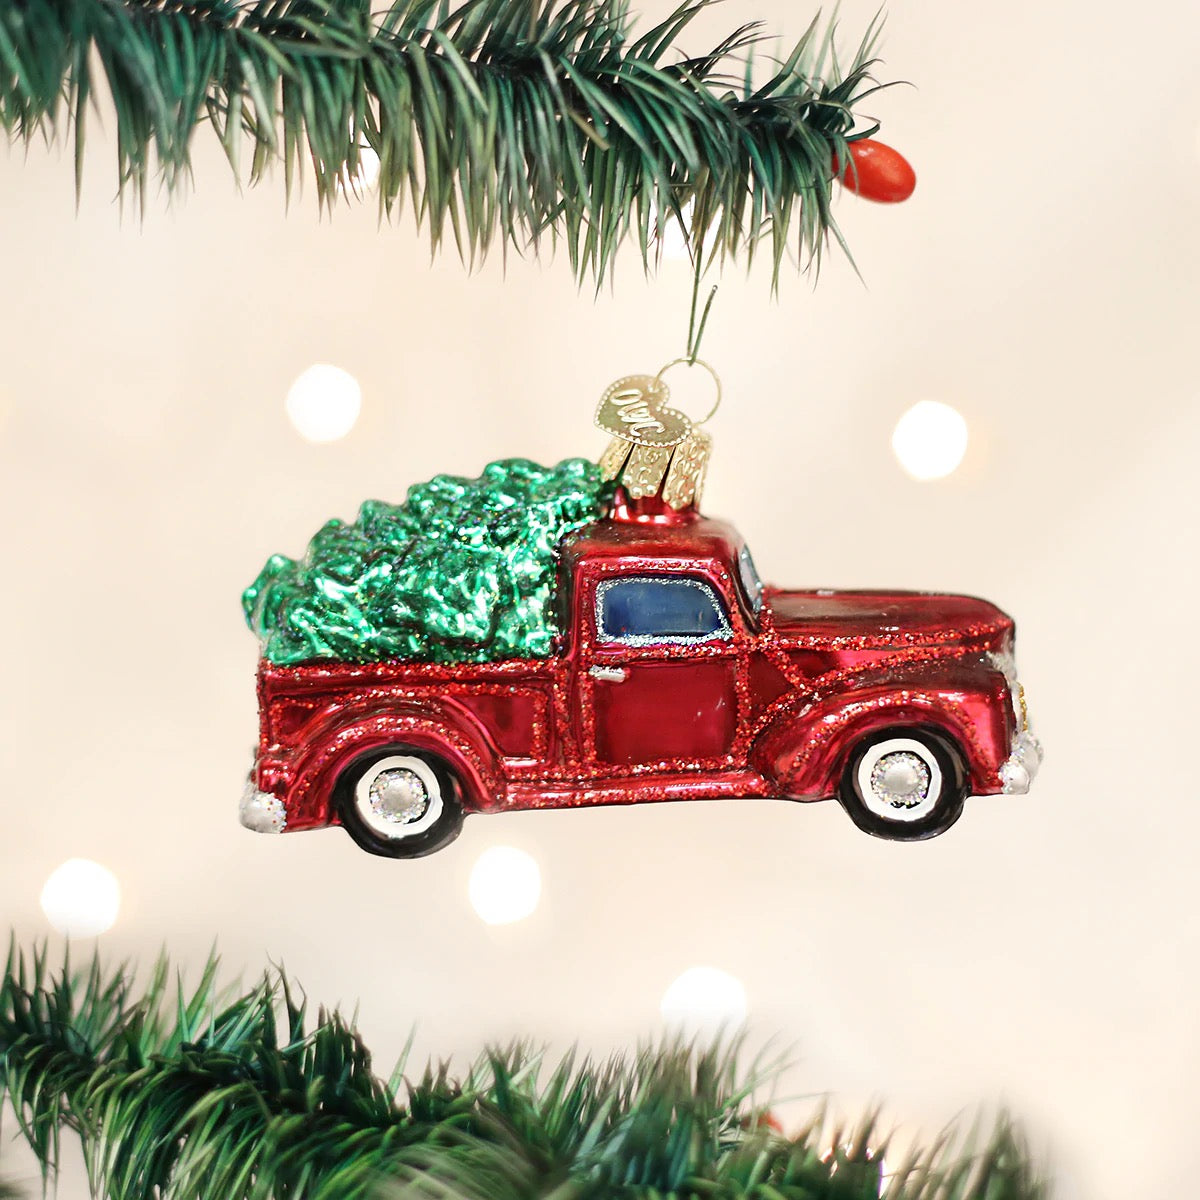 Old Truck With Tree Ornament  Old World Christmas   